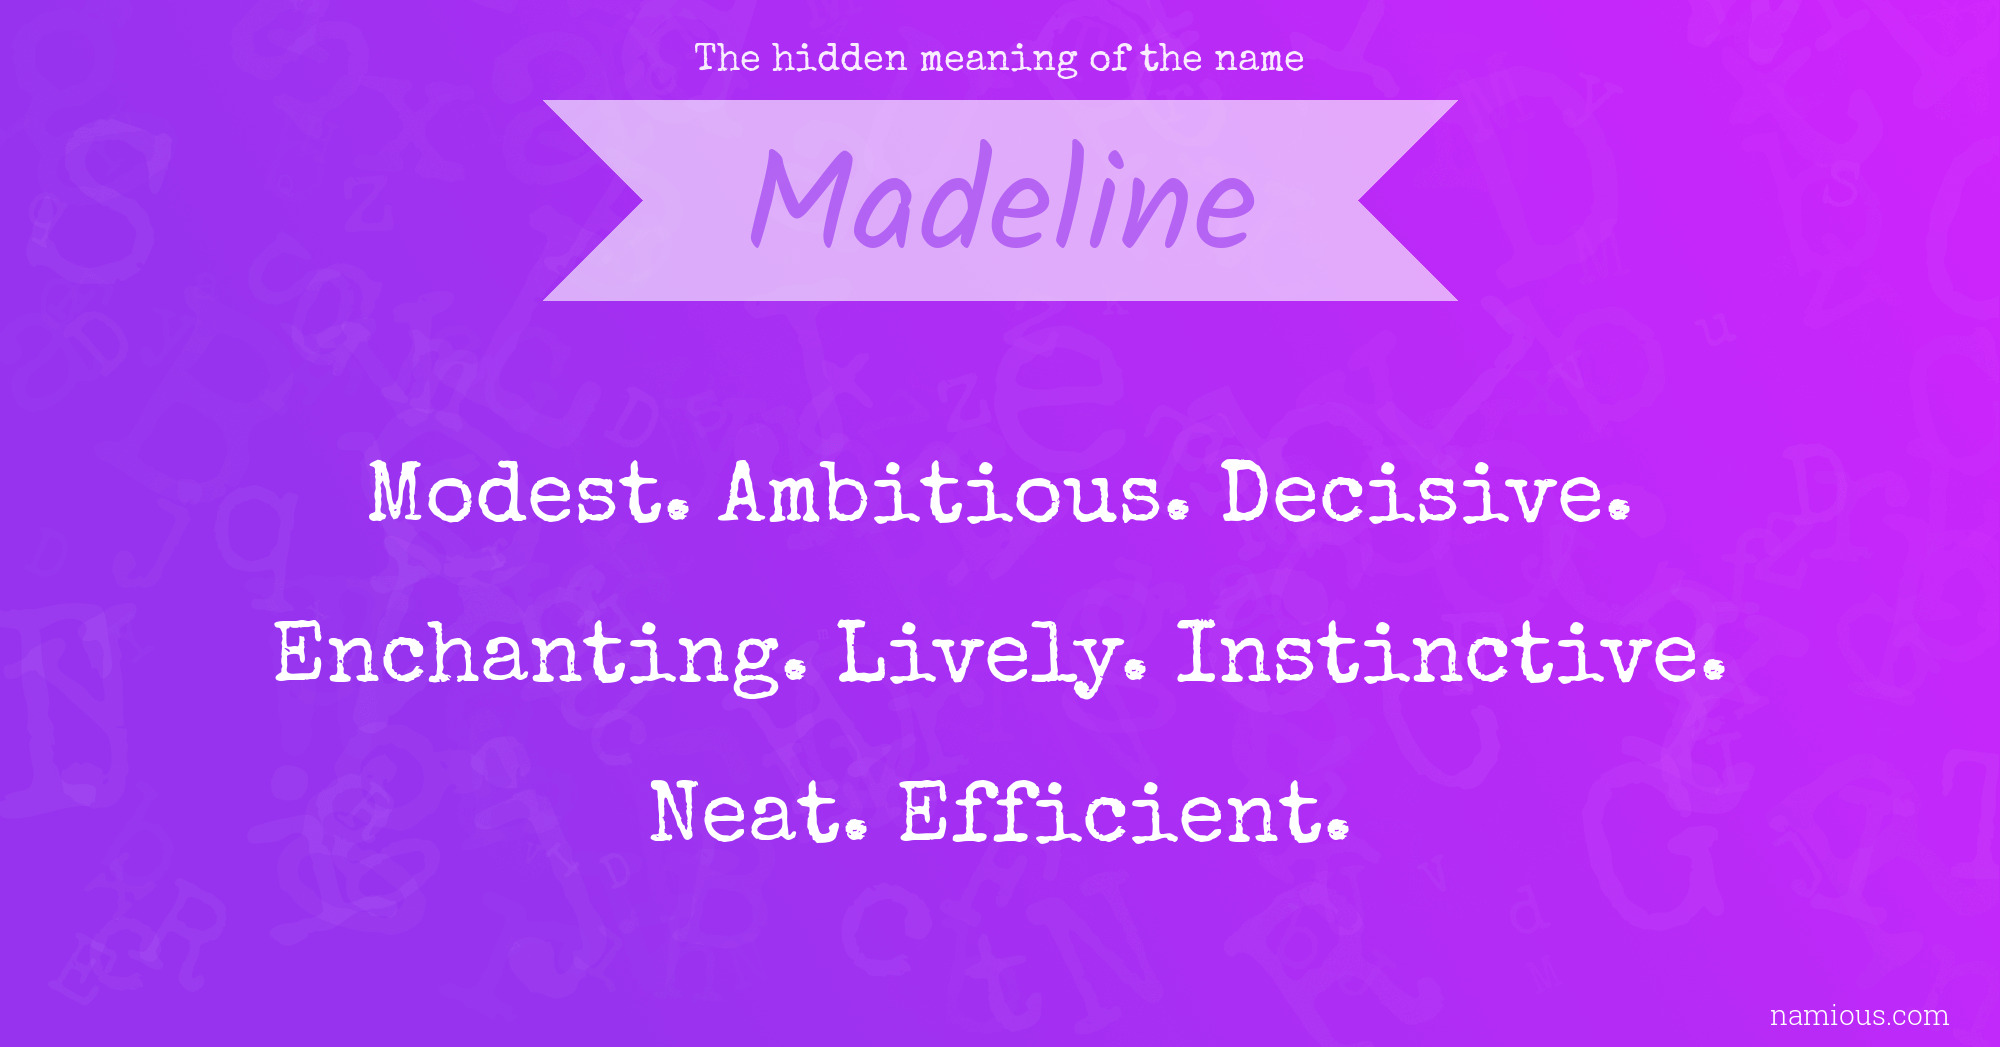 The hidden meaning of the name Madeline